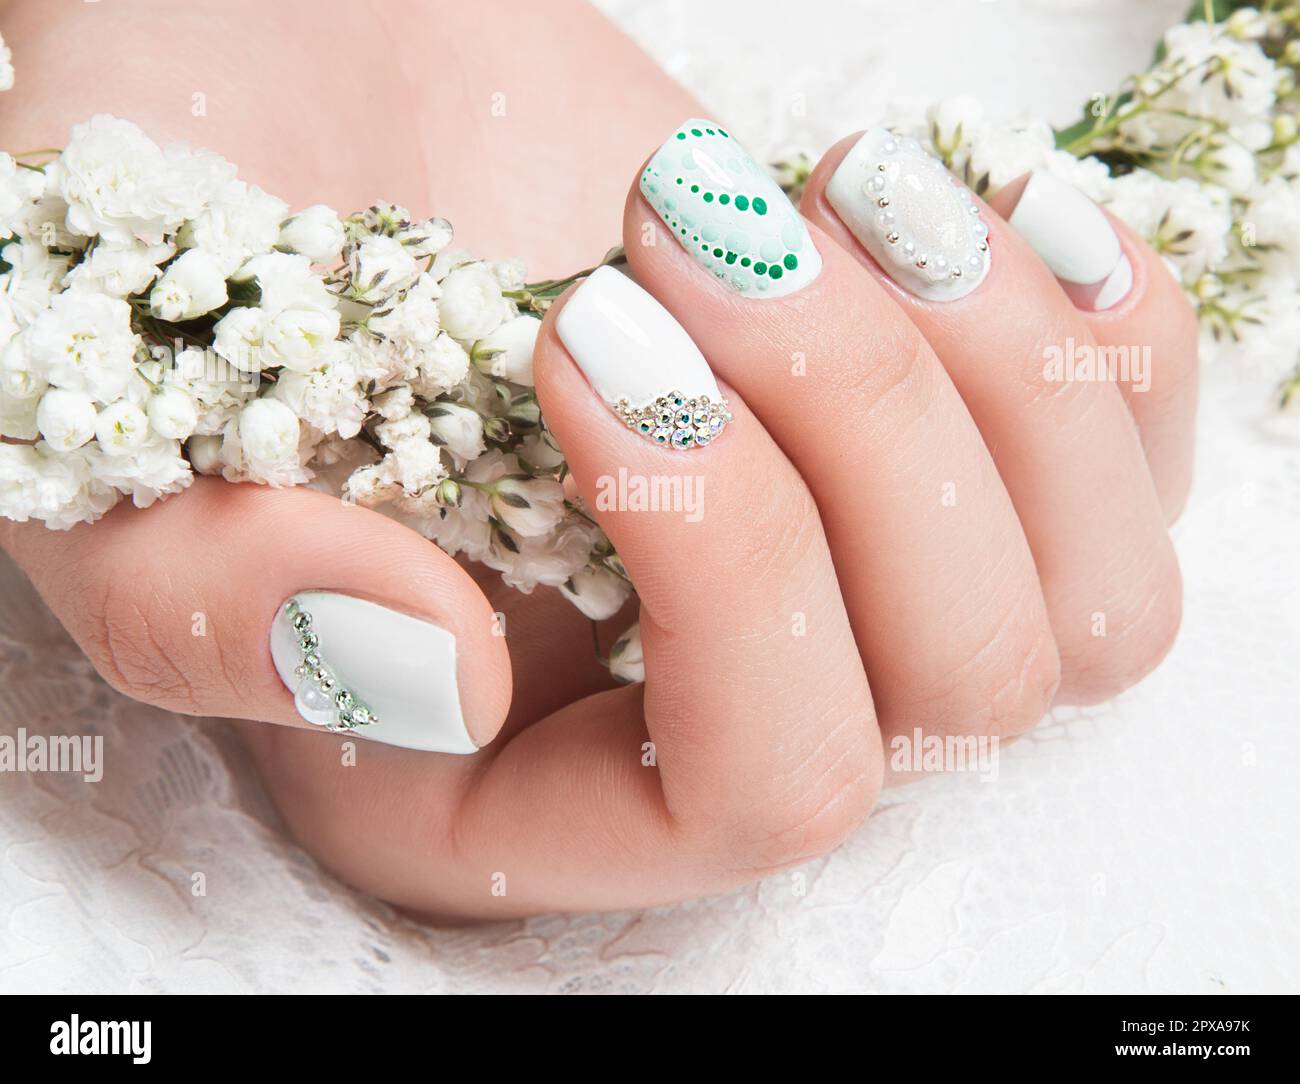 Beautifil wedding manicure for the bride in gentle tones with